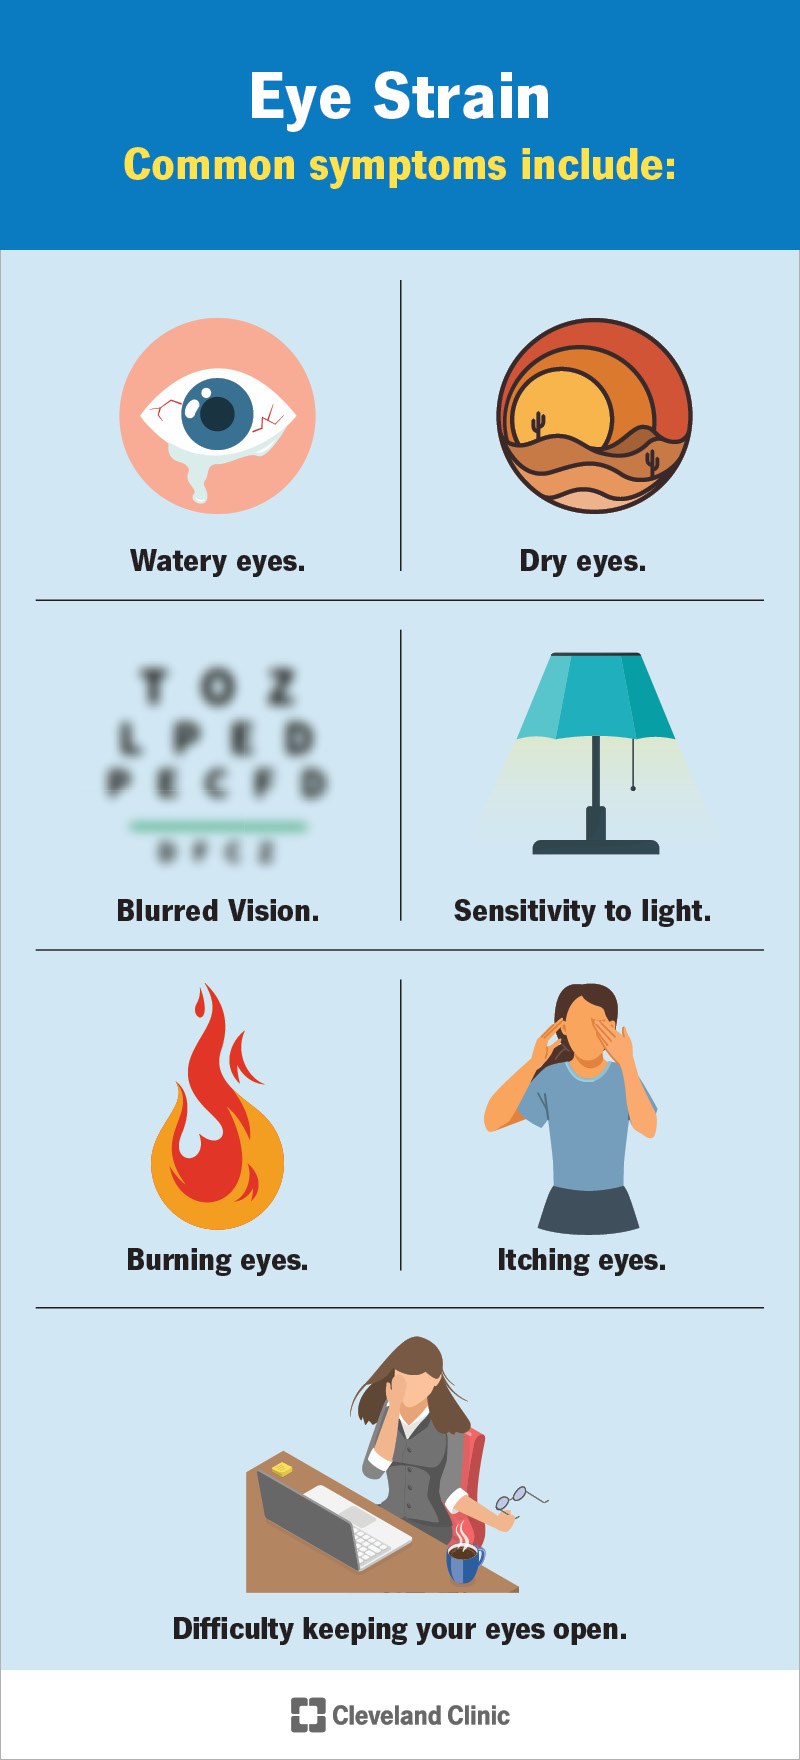 Risk Factors And Precautions For Eye Fatigue - Ask The Nurse Expert